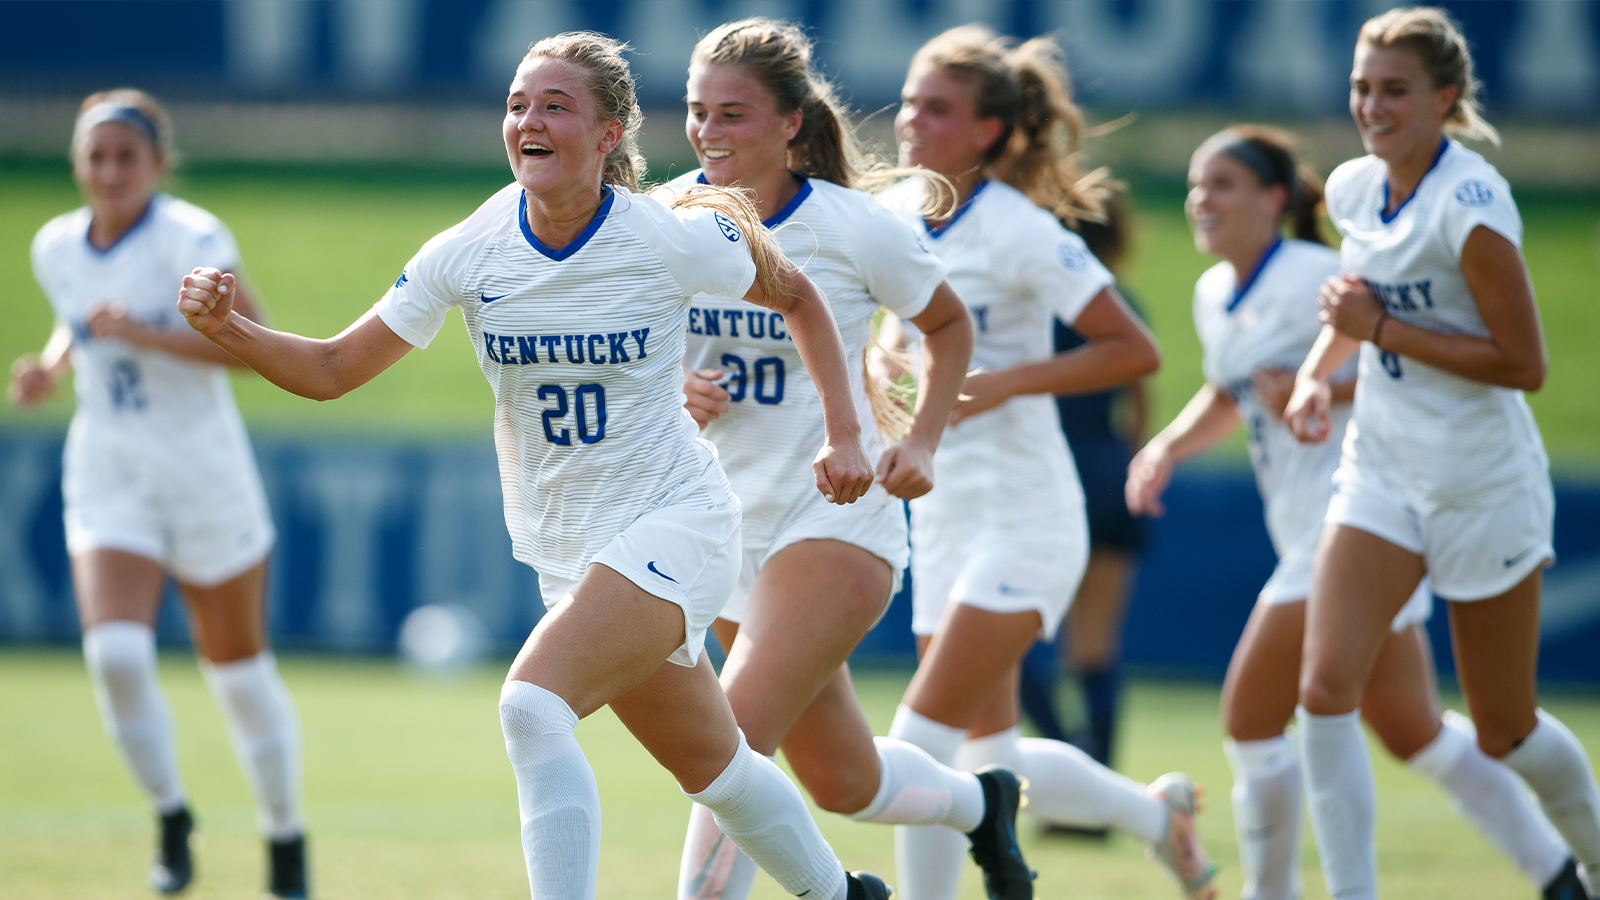 Kentucky Posts 2-0 Shutout Over Missouri in Home Finale